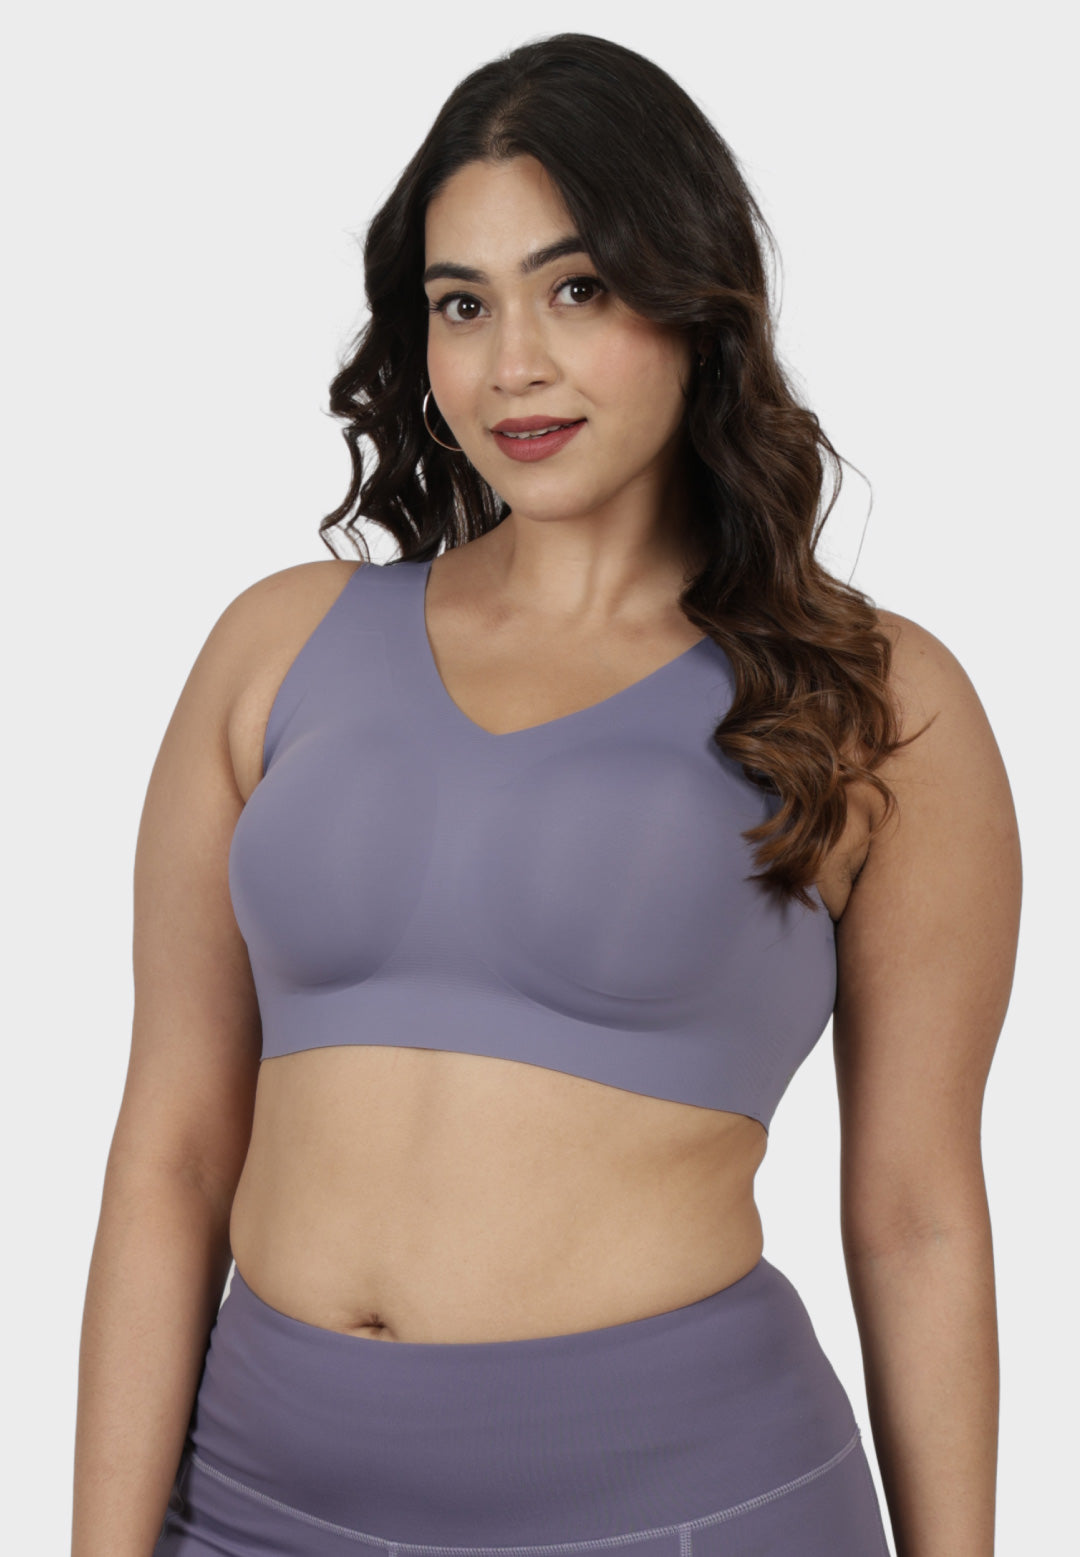  Bra for Women Womans Bras Comfortable Bra Plus Size Swimsuit  for Women Clearance Women's Clothing Less Than $5 Lace Bra Seamless Sports  Bras for Women : Sports & Outdoors